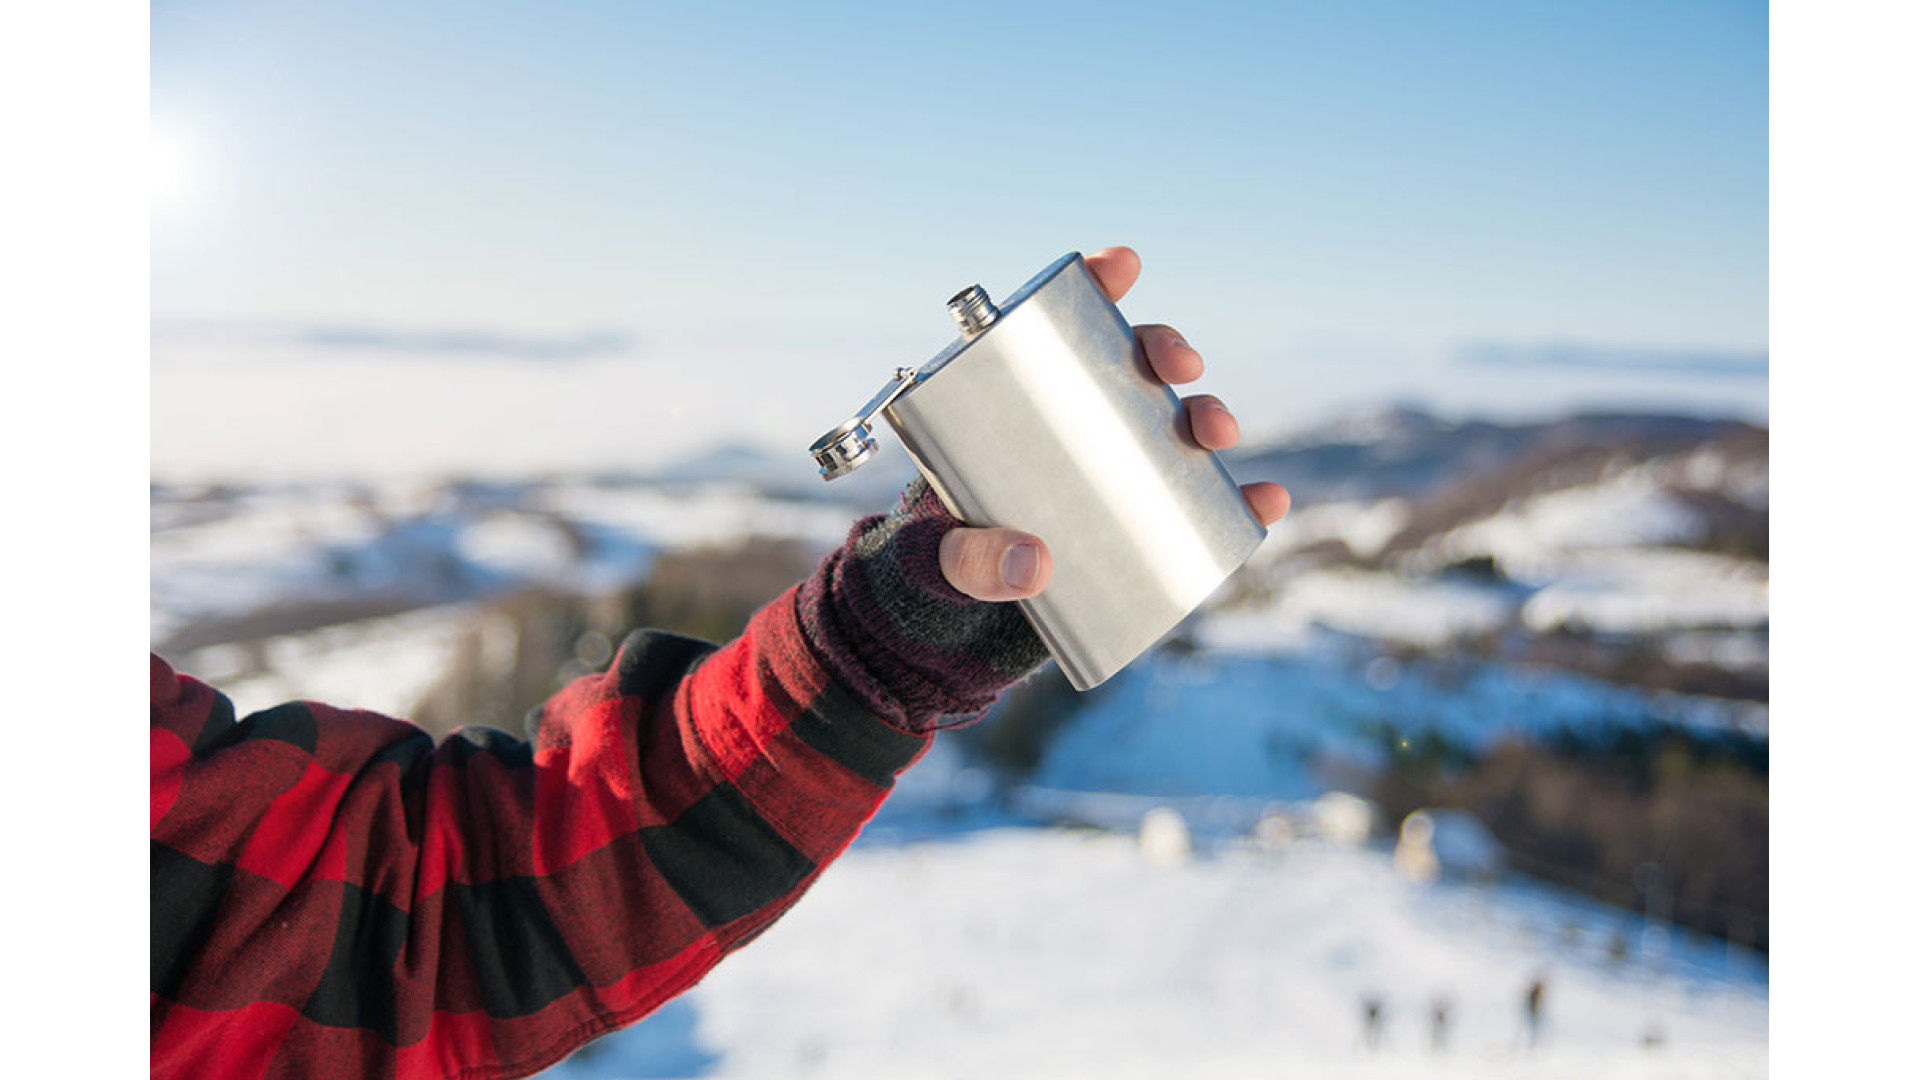 https://www.ckbproducts.com/image/cache/catalog/Ckb%20blog/best-places-to-take-your-hip-flask-1920x1080.jpg